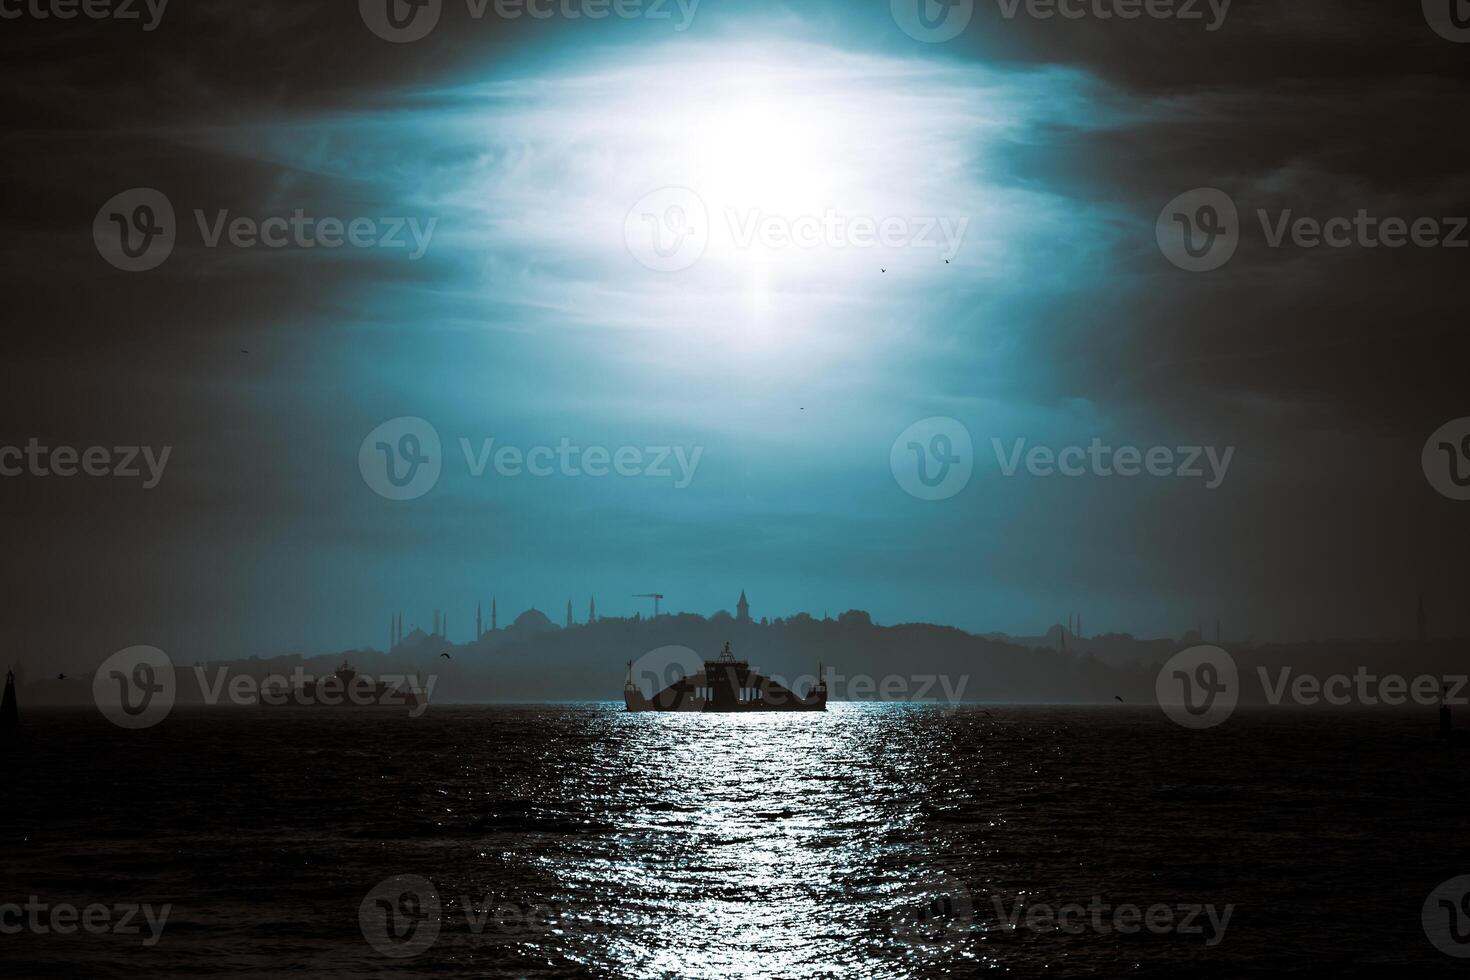 Istanbul background photo. Silhouette of a ferry and cityscape of Istanbul photo